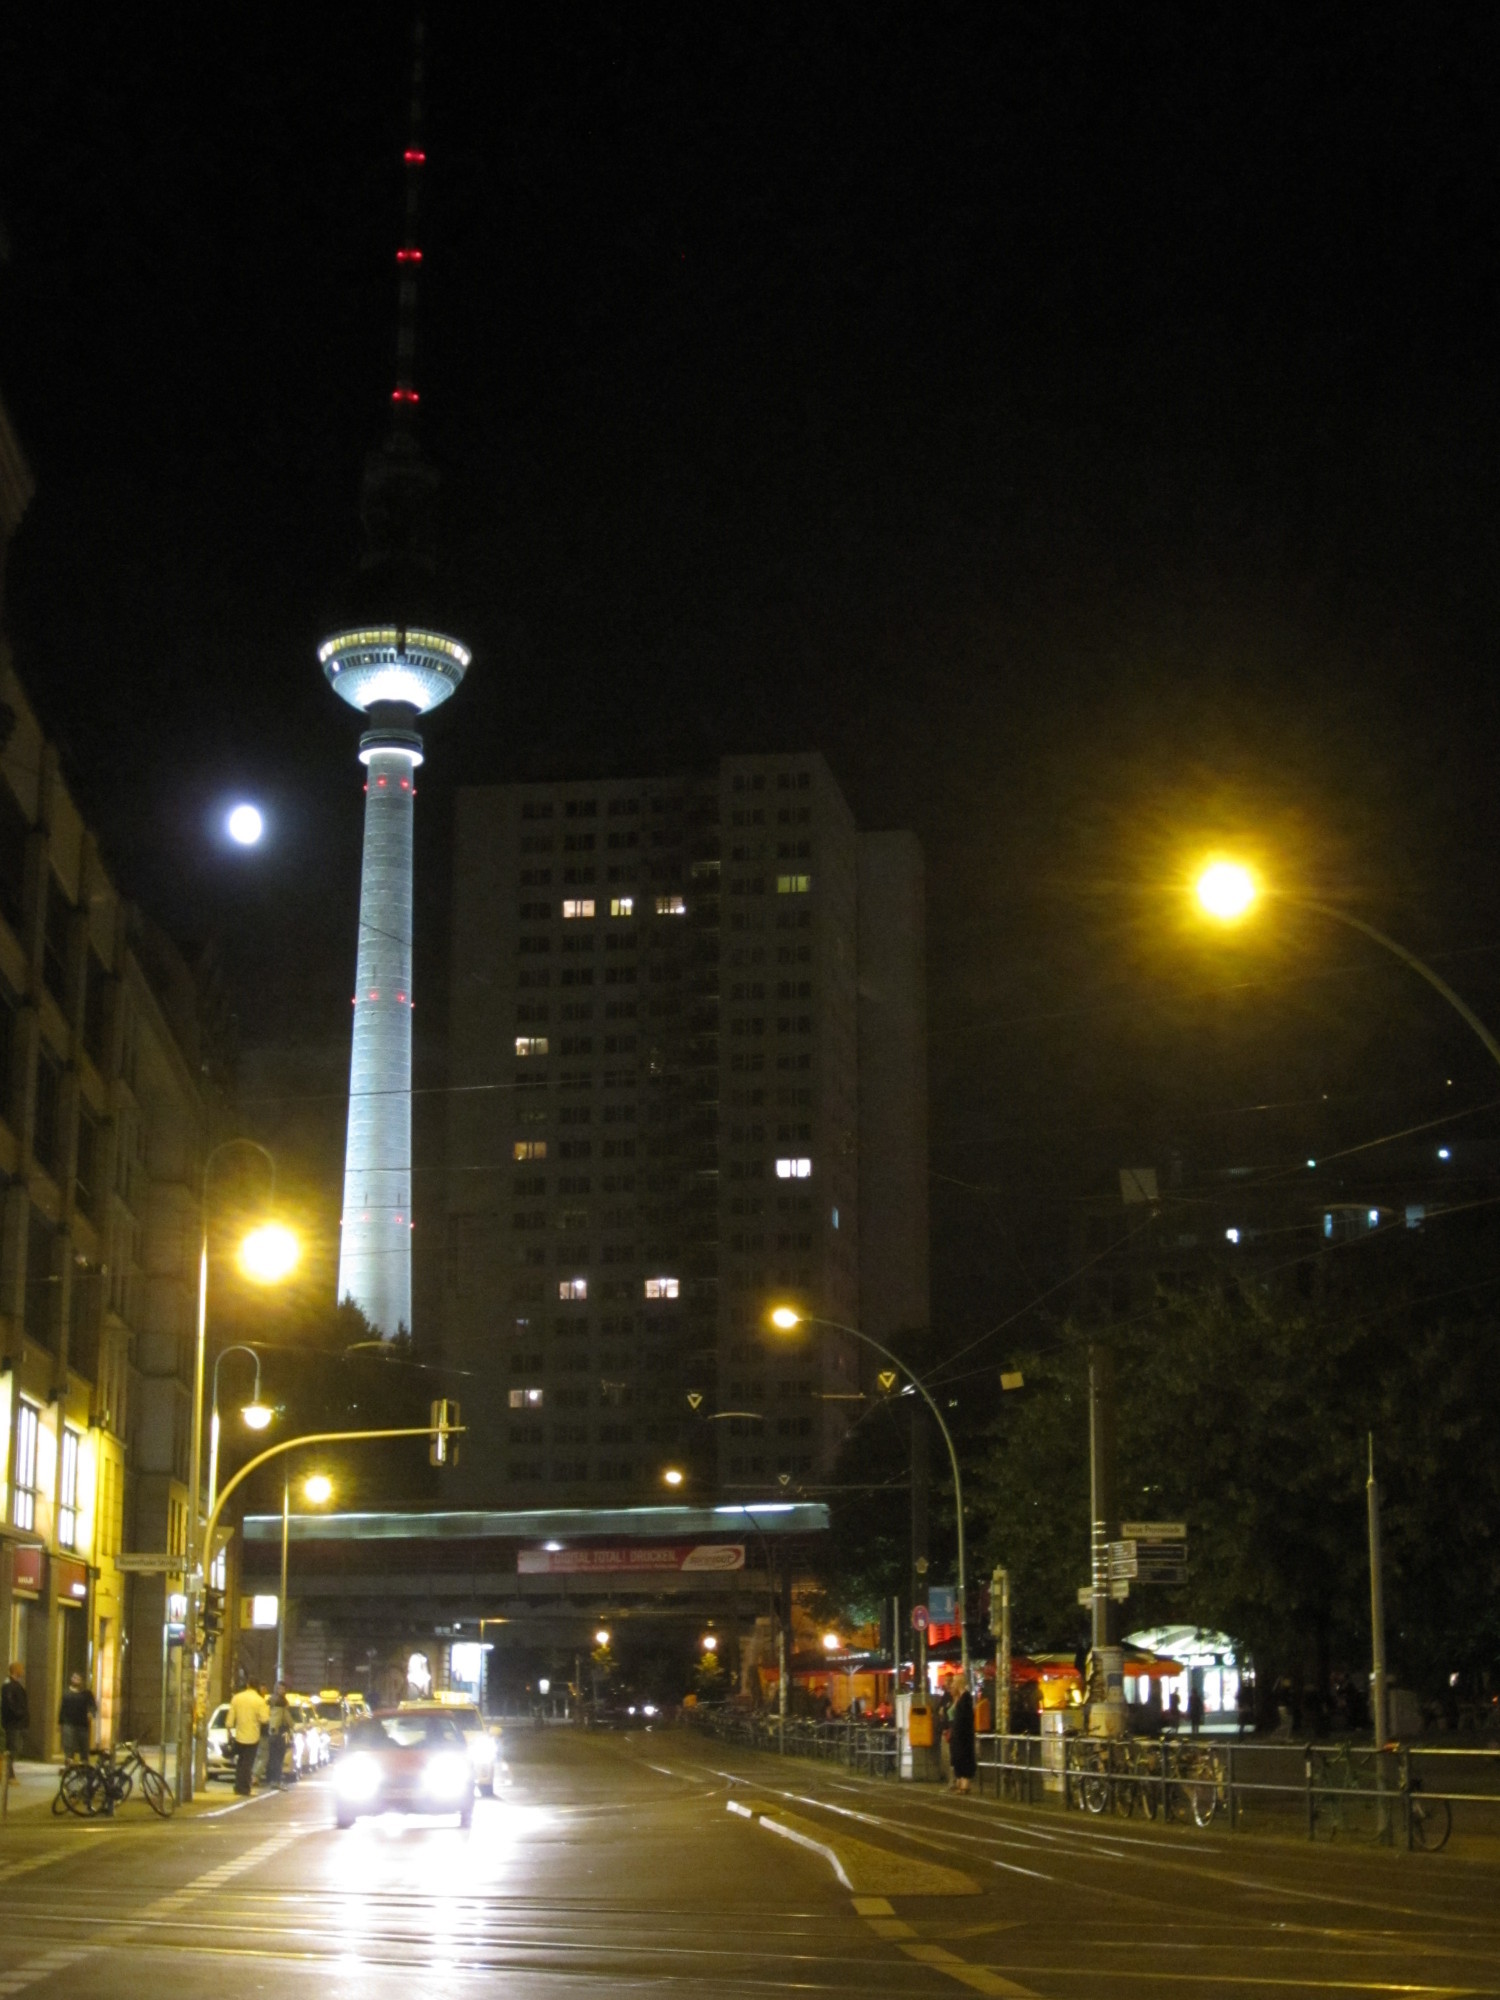 The Fernsehturm by the moon